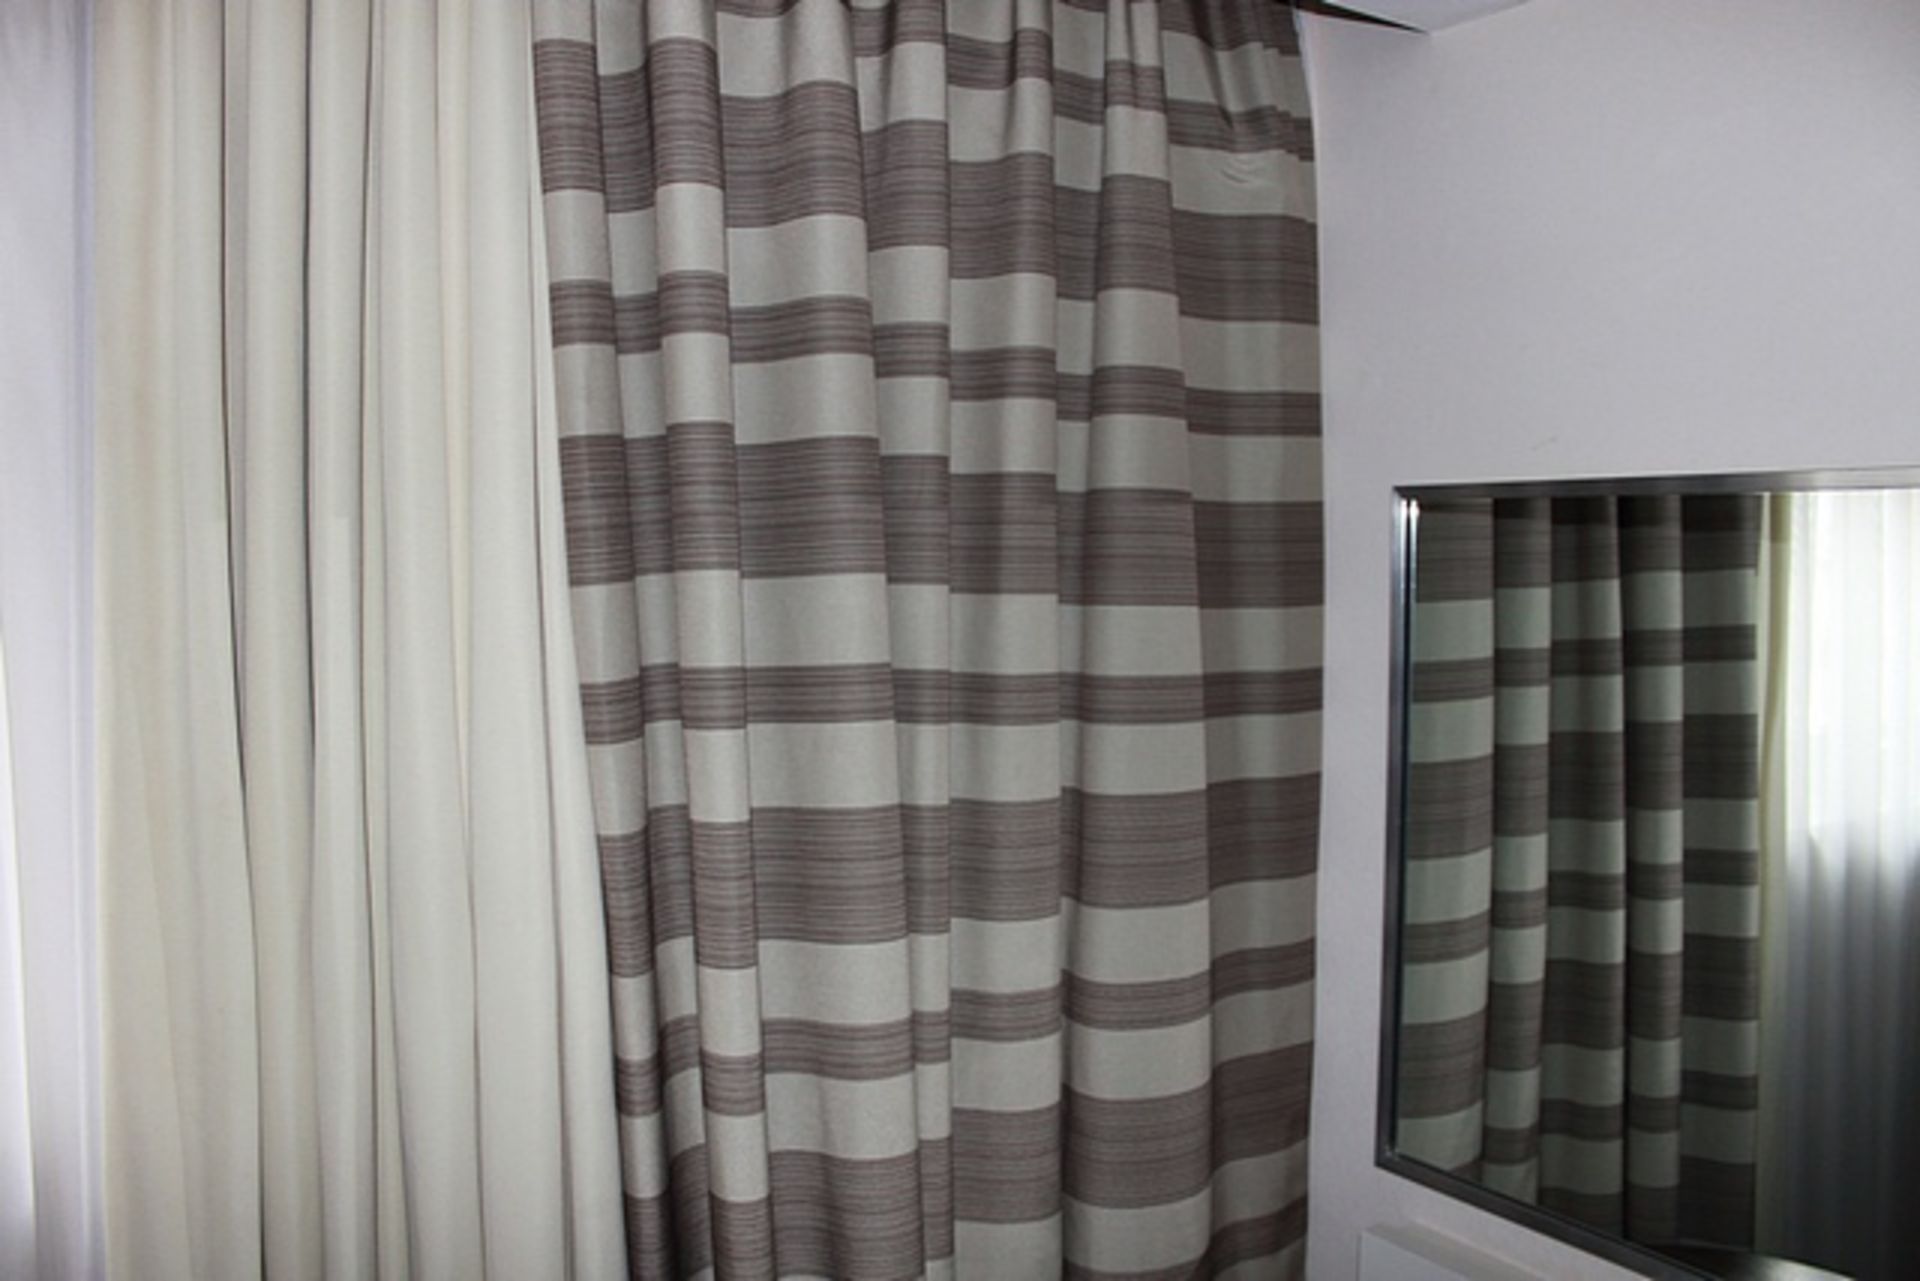 Sinclaire Fabrics a pair of drapes lined with blackout fabric spans 2000 x 2600mm (FM32AP1) - Image 3 of 4